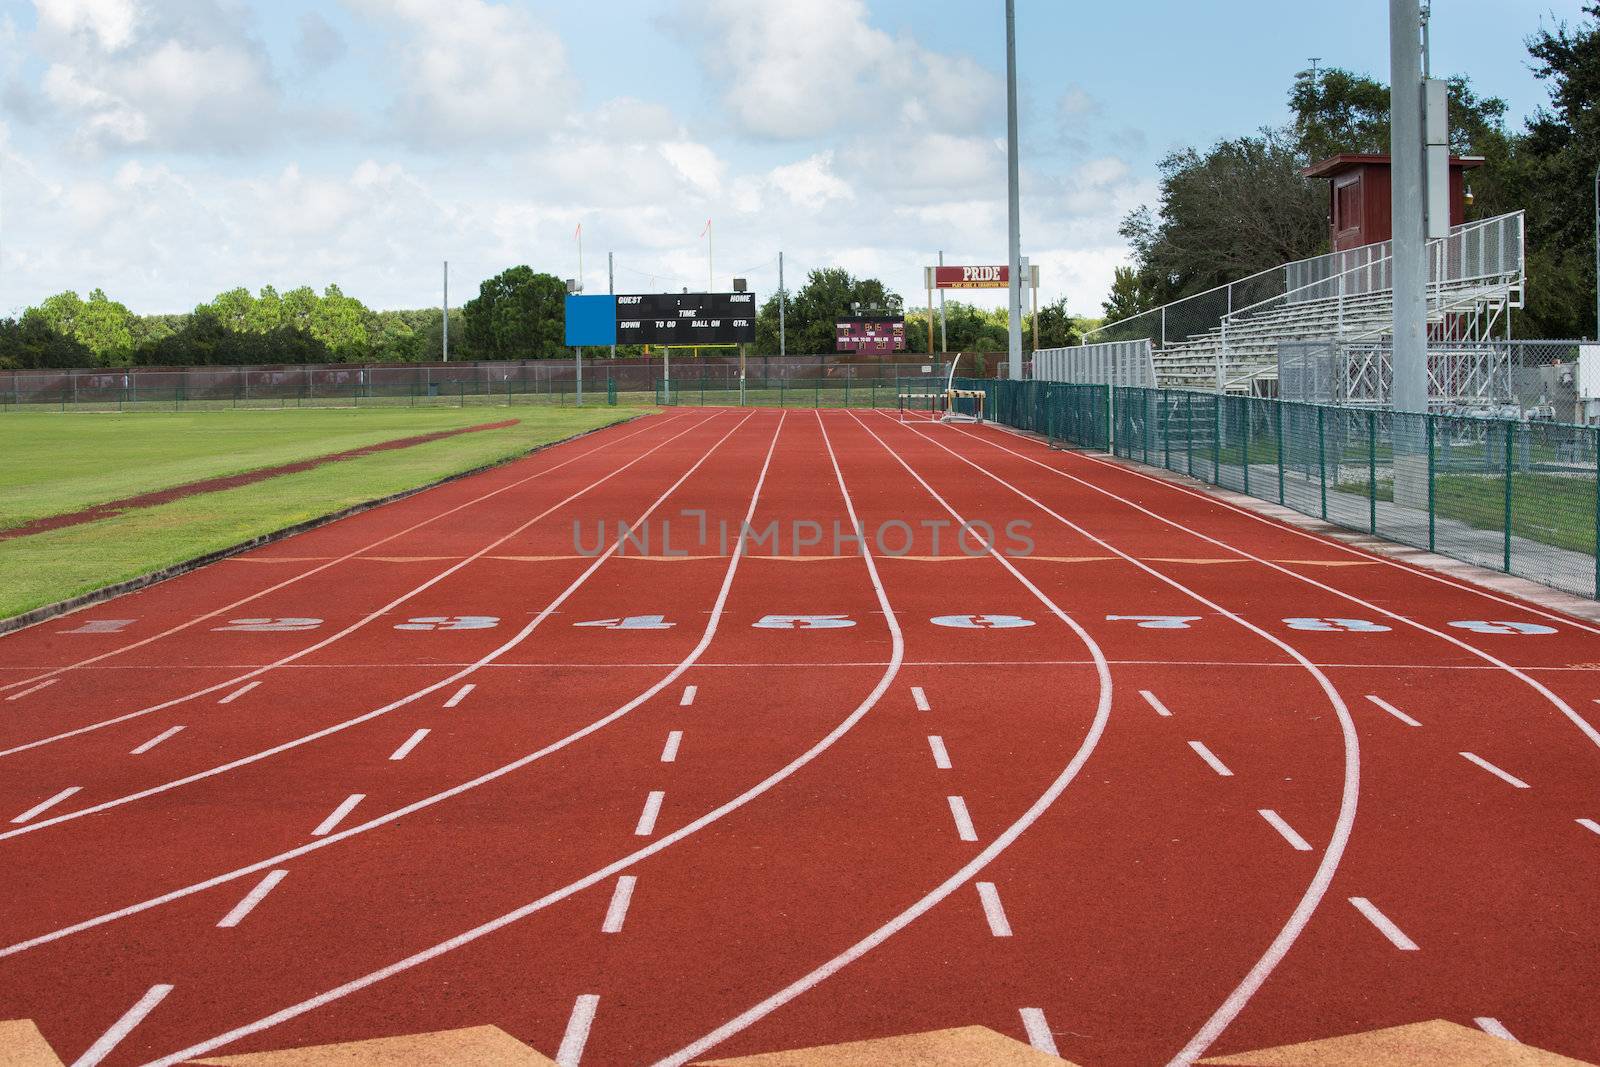 This image shows the nine lanes and the start at the local running track.